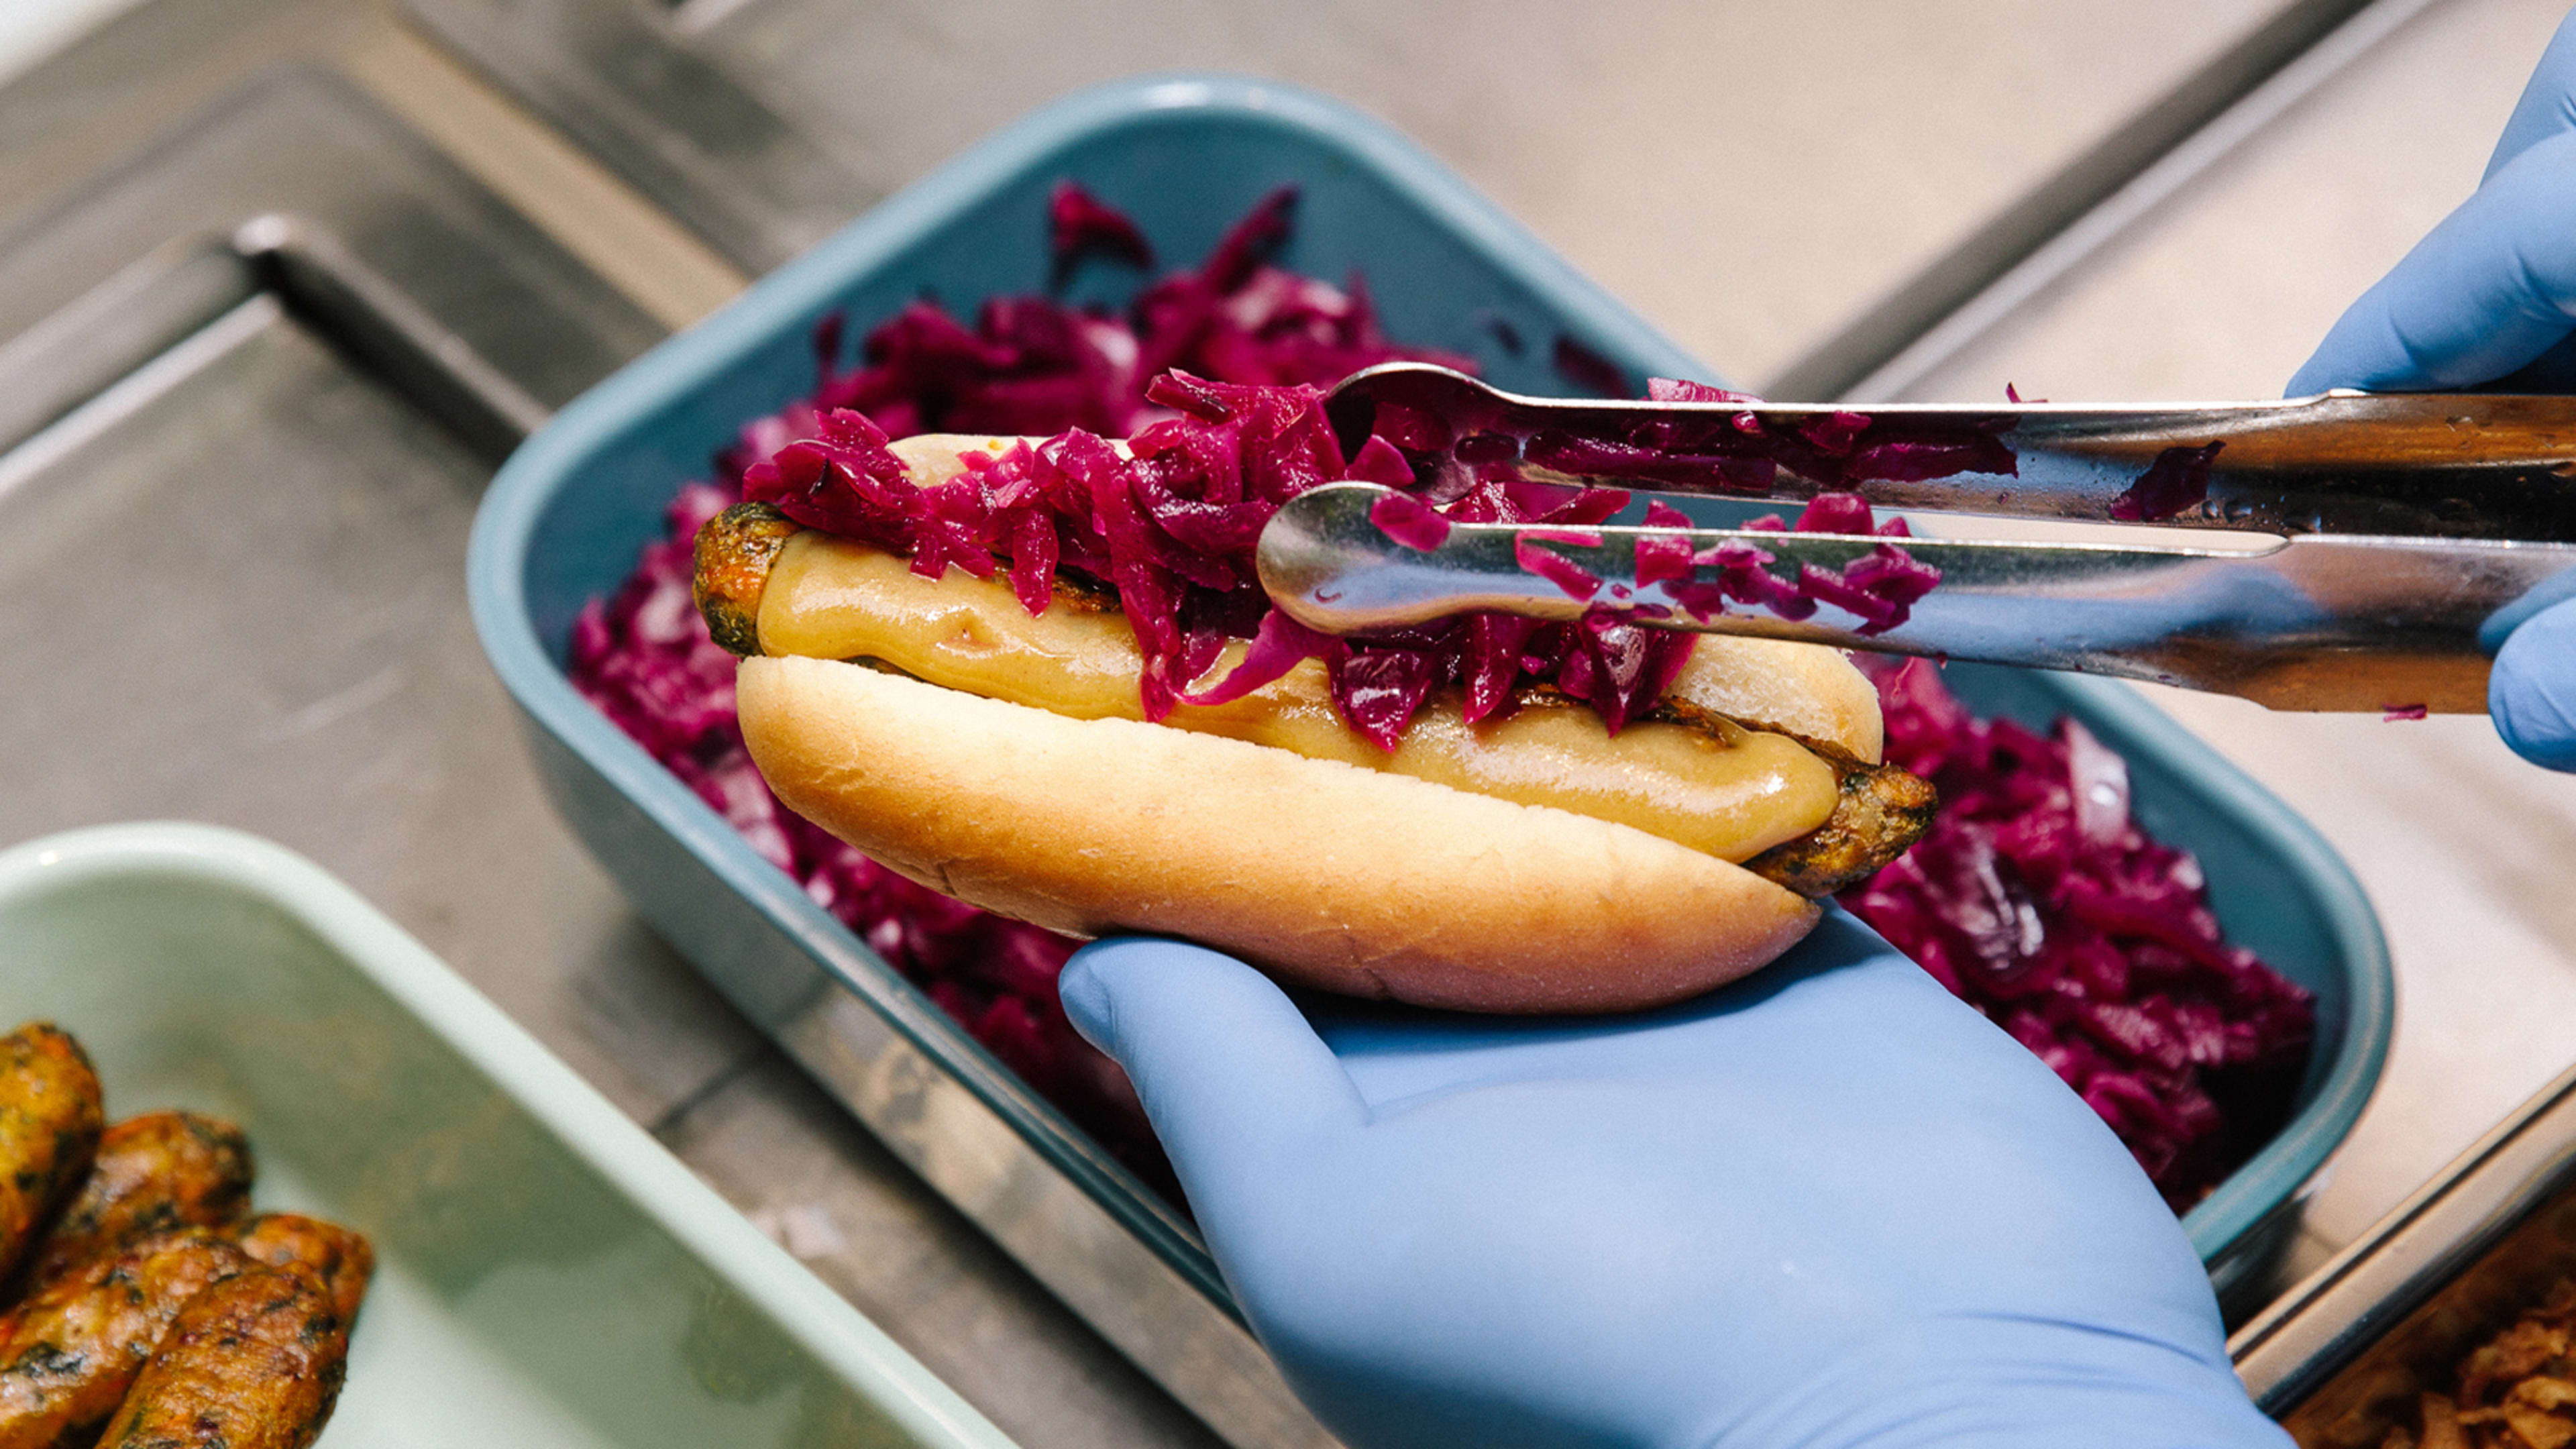 In two months, Ikea sold 1 million of its new veggie hot dogs